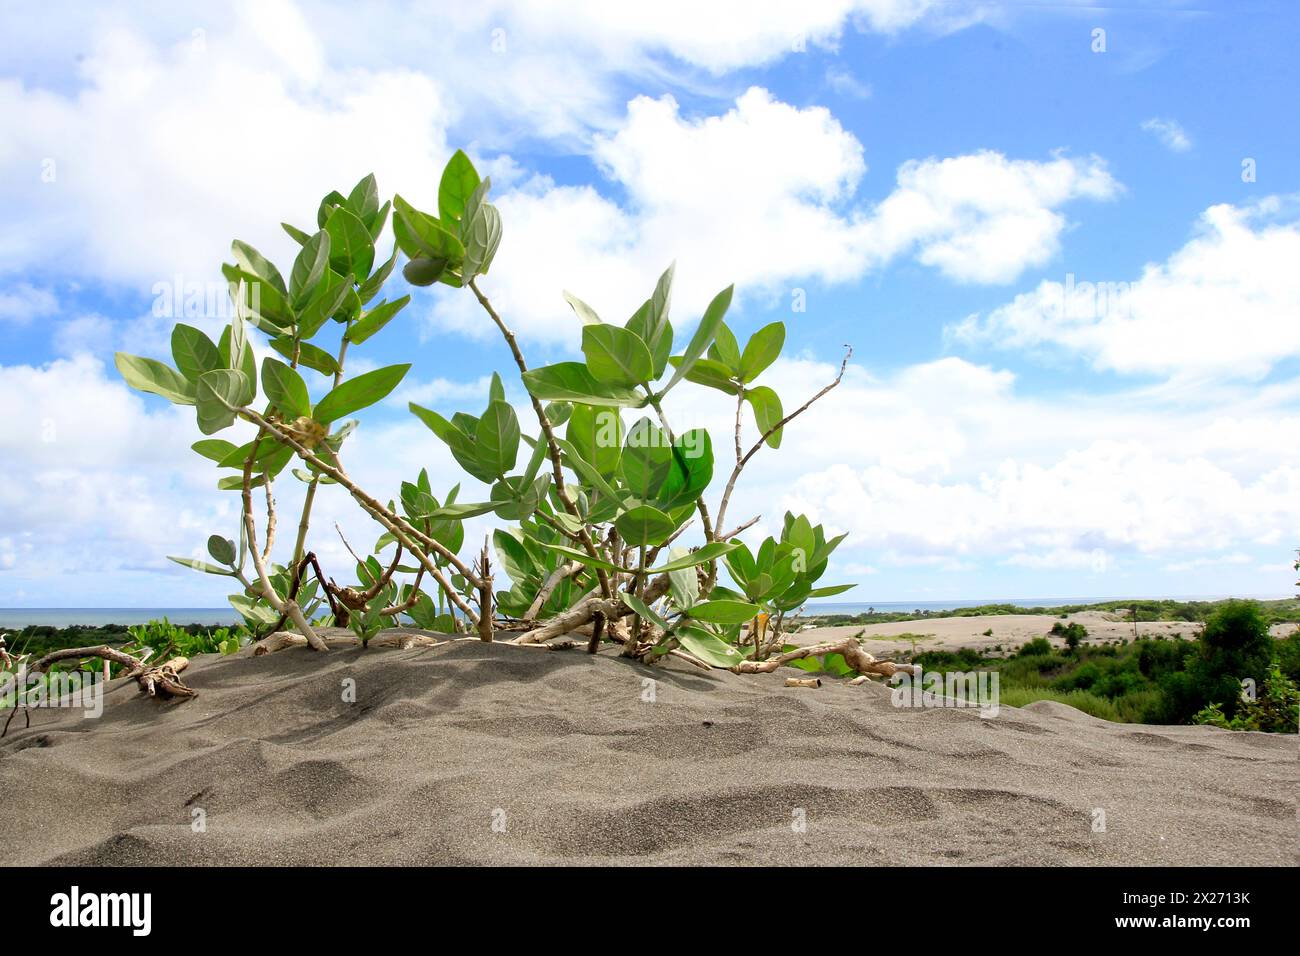 Vines that grow in the sandbanks area of Parangkusumo Beach and function as an abrasion barrier. Stock Photo